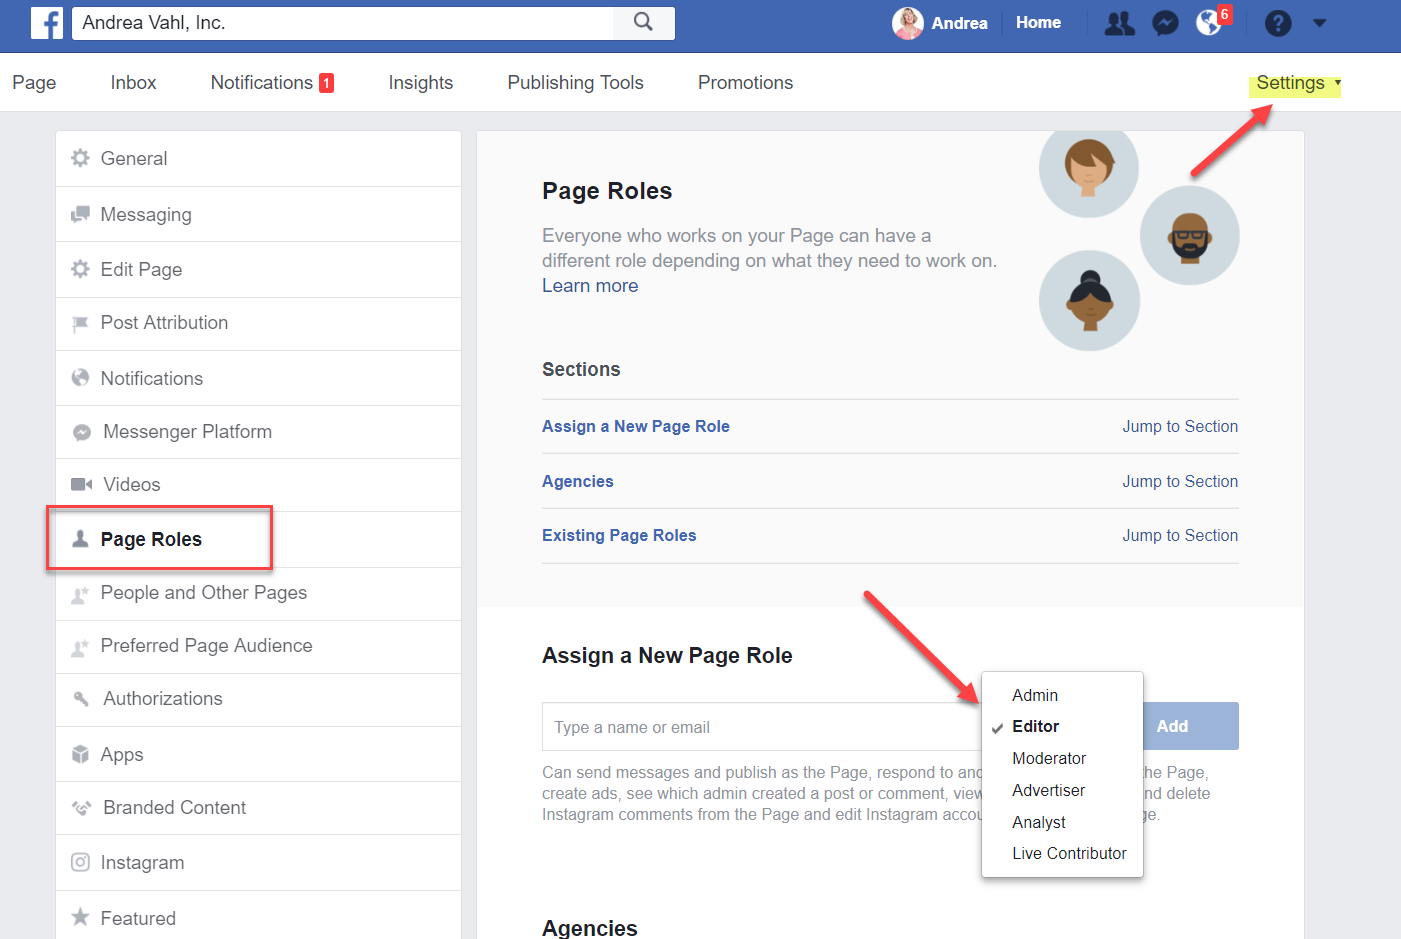 How to Easily Add a Facebook Admin to Your Page